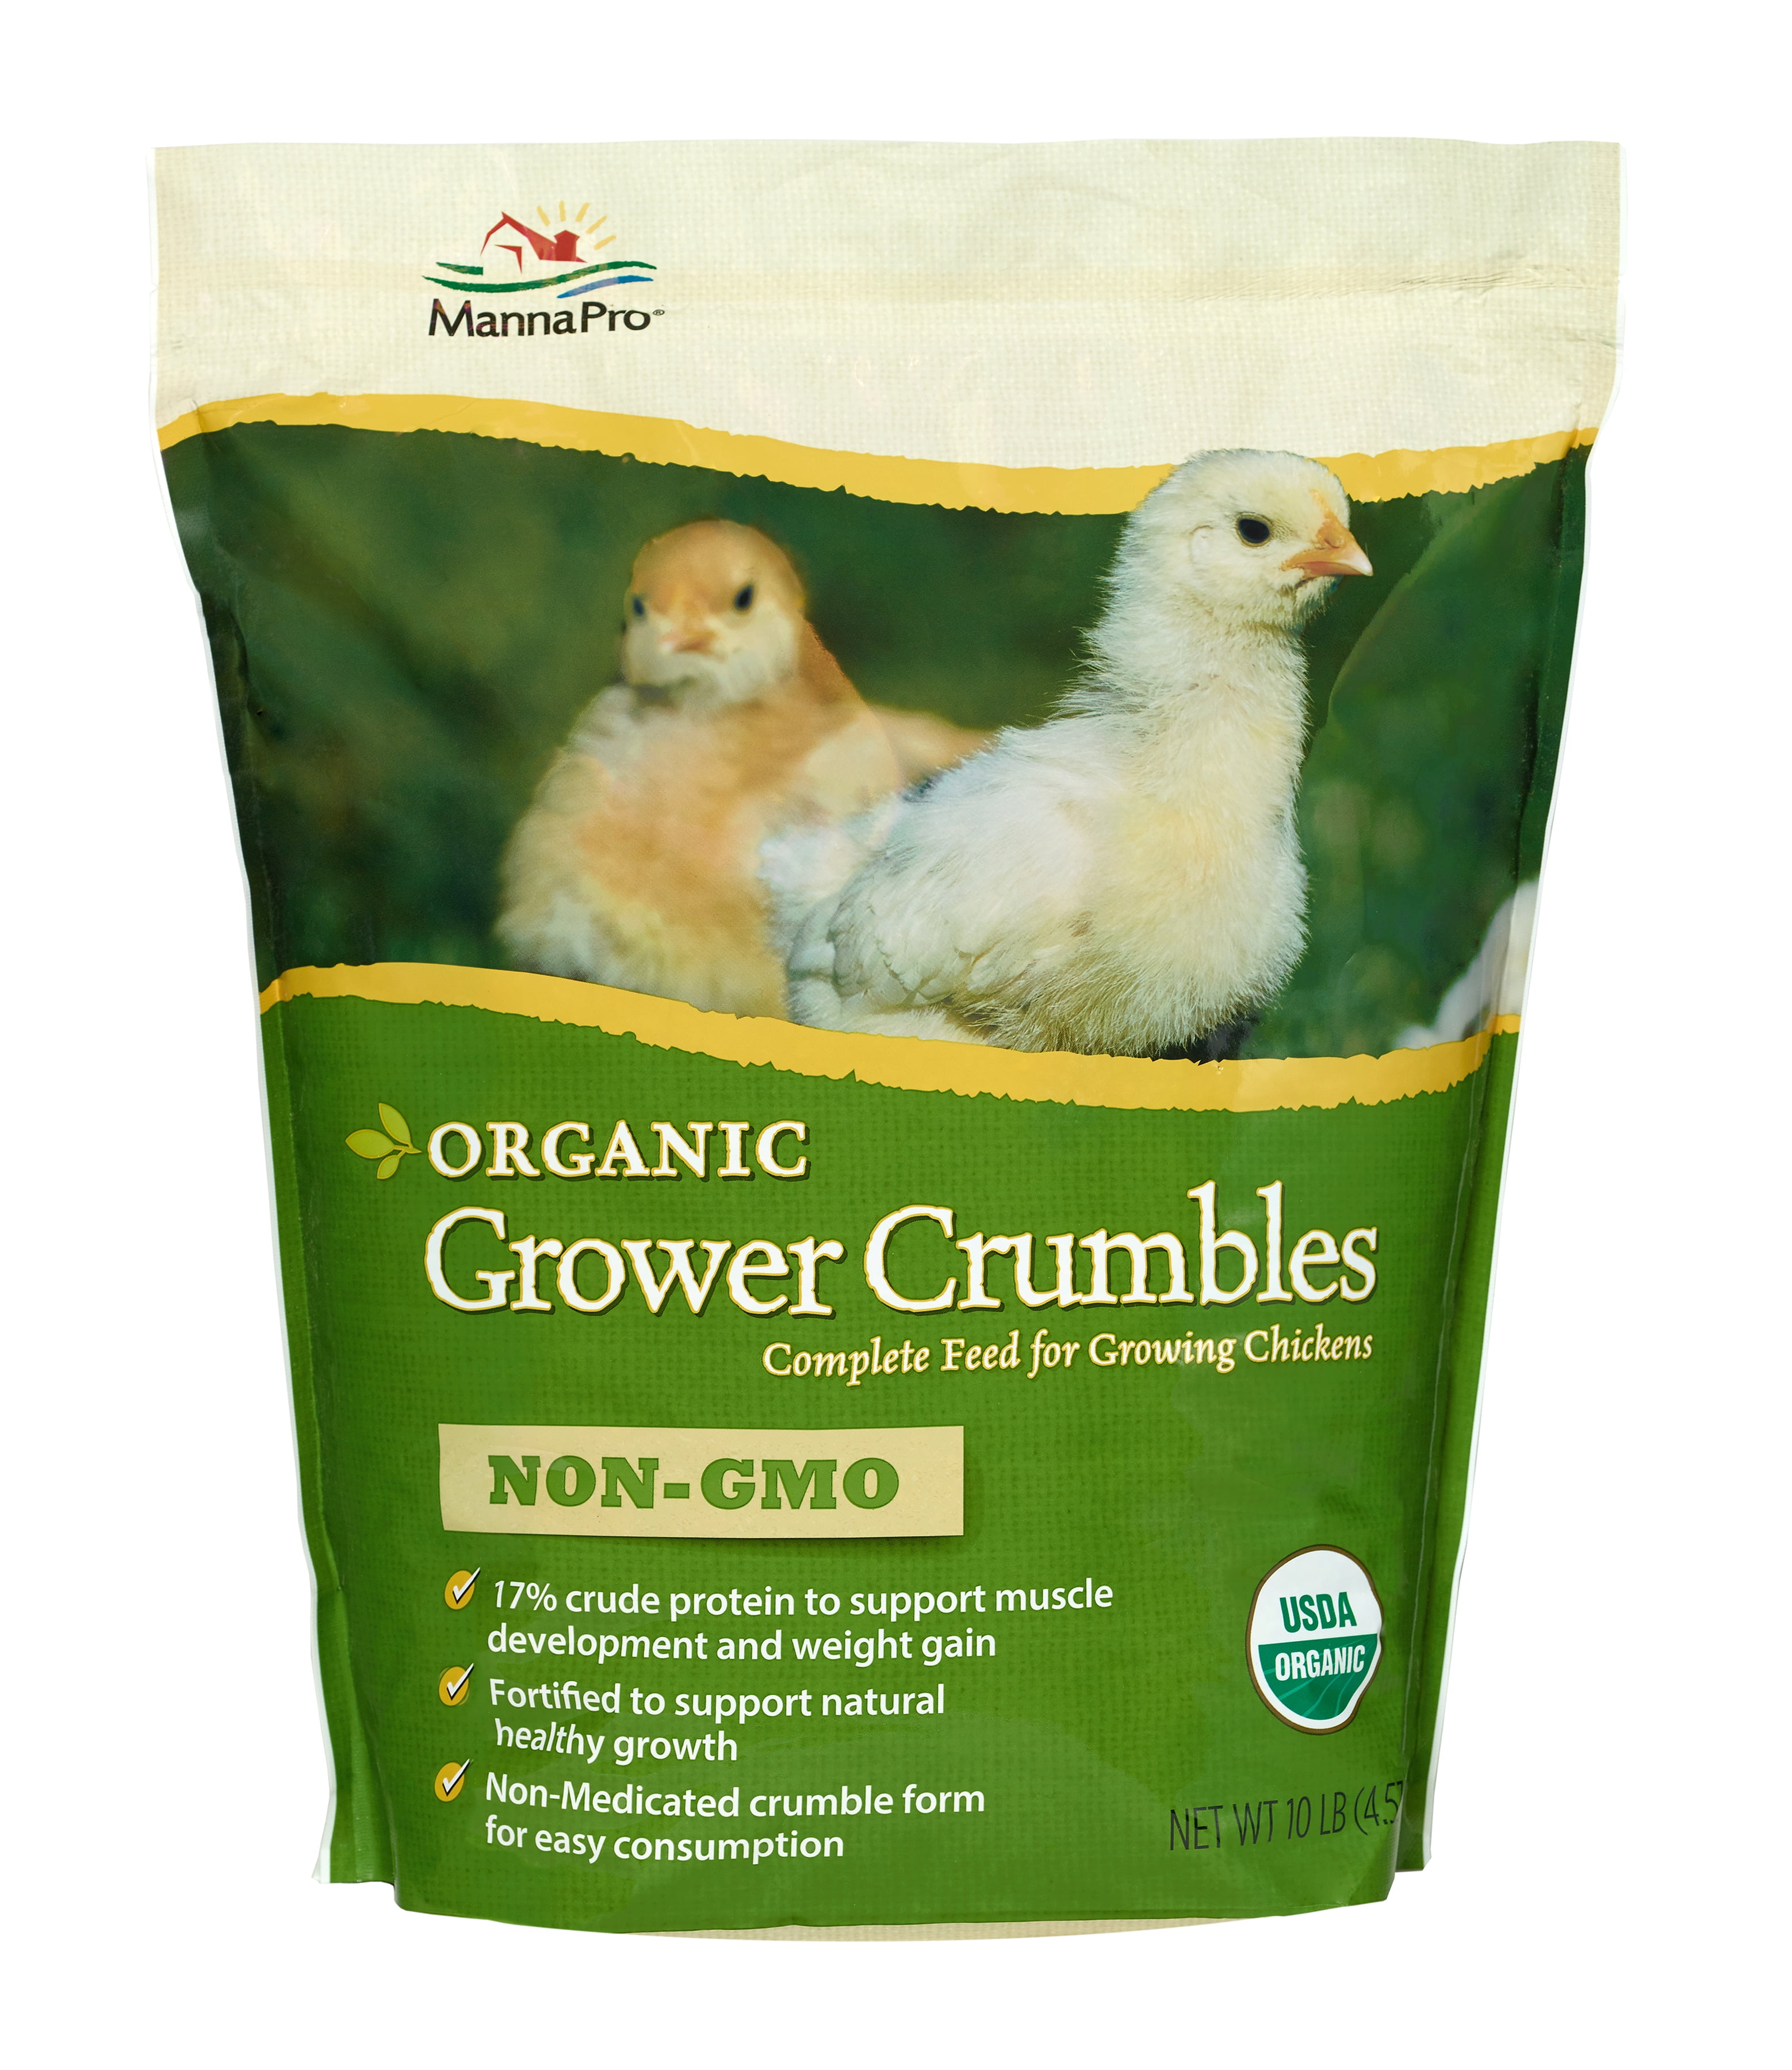 USDA & Non-GMO Manna Pro Organic Starter Crumble Complete Feed 5 Pounds Made with 19% Protein